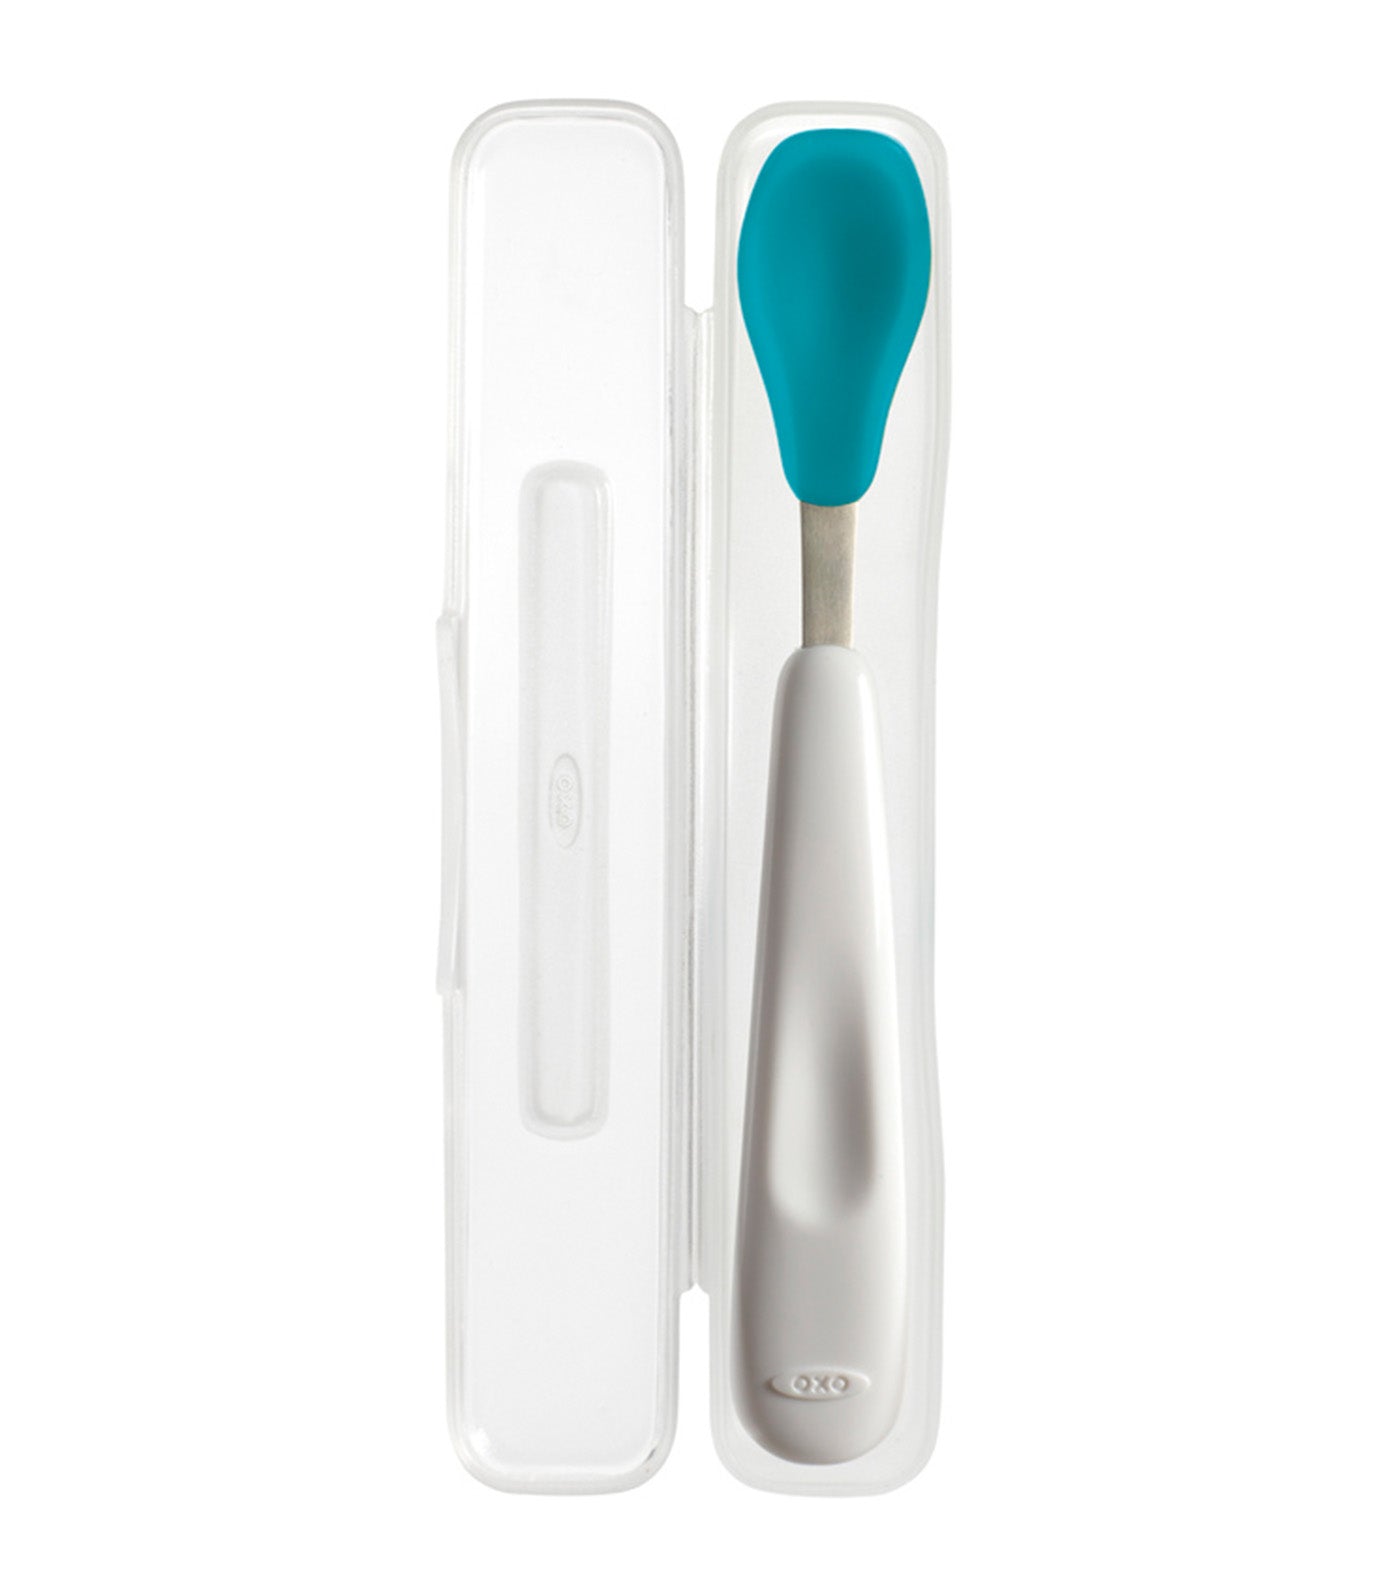 OXO Tot On-The-Go Fork And Spoon Set, Stainless Steel, TPR, Plastic - Teal